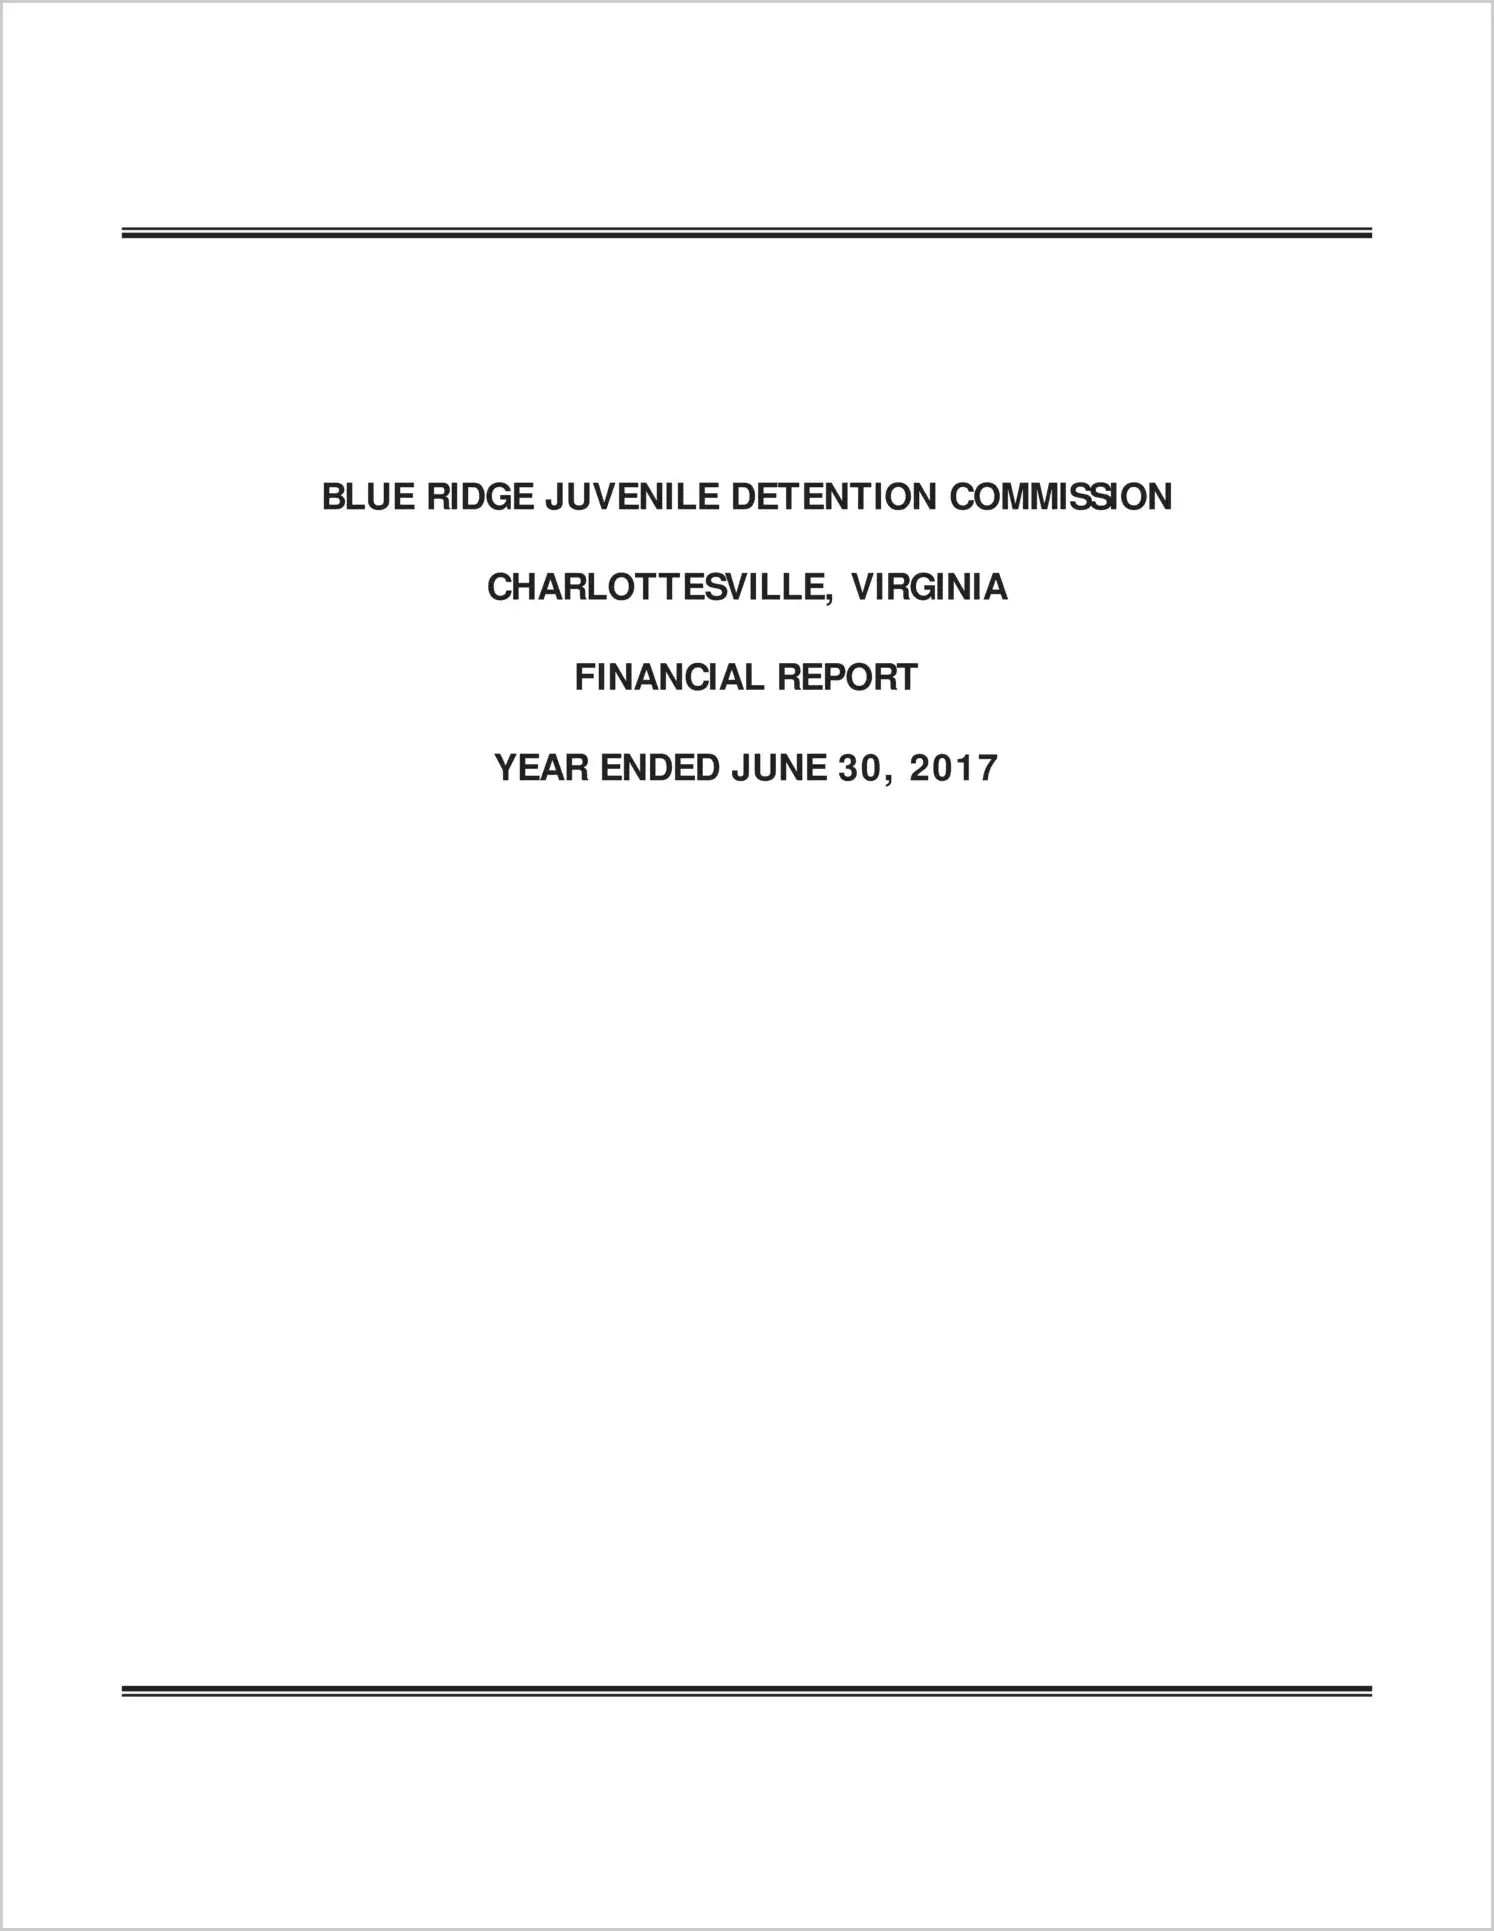 2017 ABC/Other Annual Financial Report  for Blue Ridge Juvenile Detention Commission